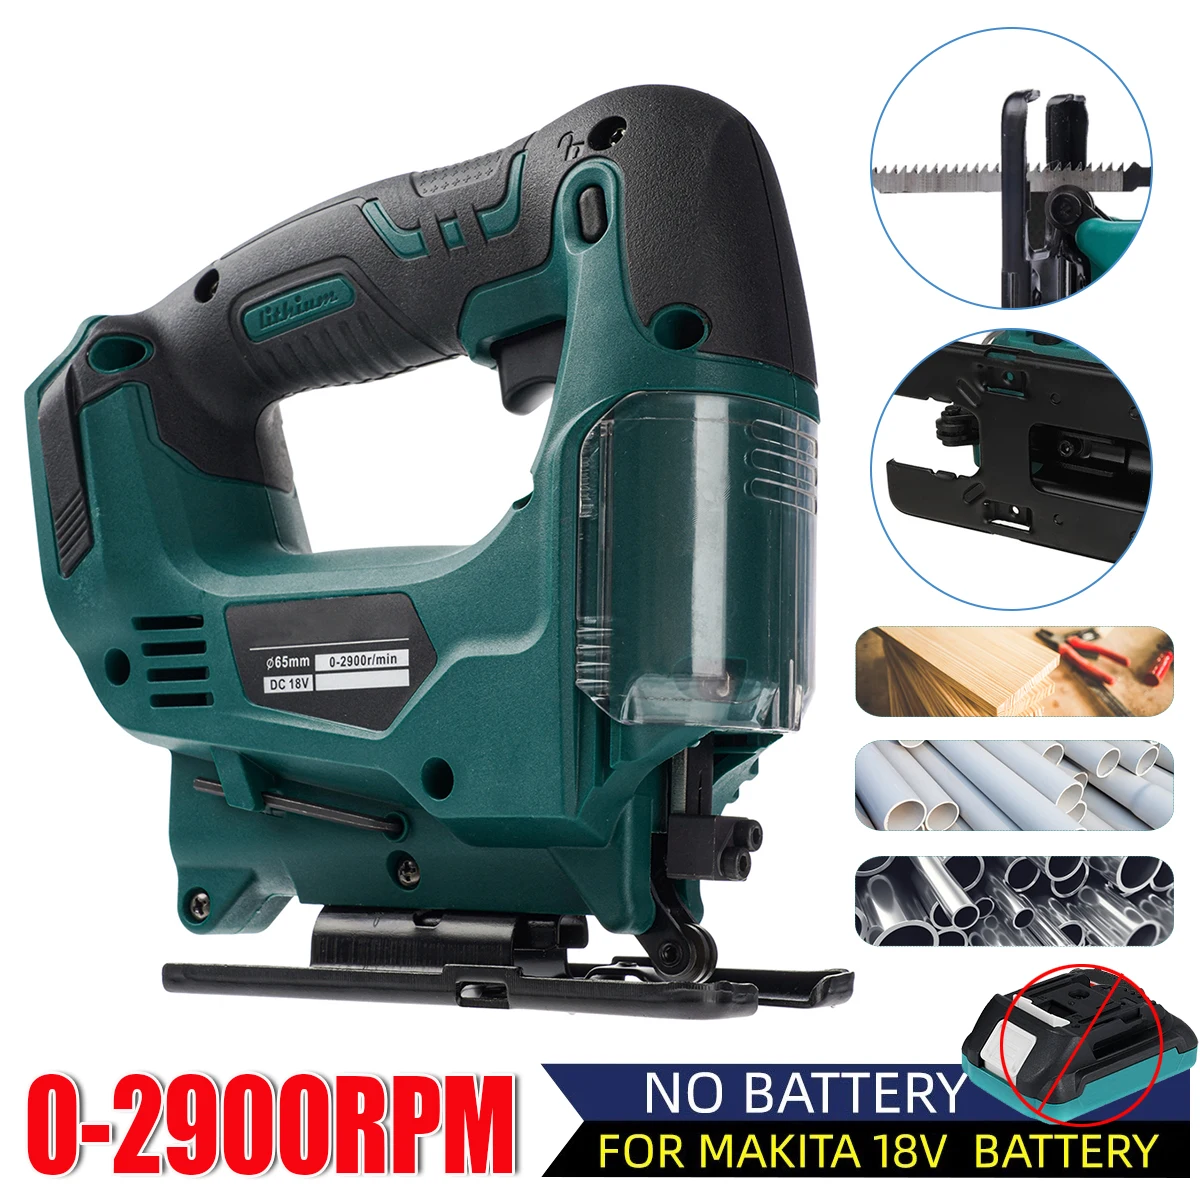 21V 65mm 2900RPM Cordless Jigsaw Electric Jig Saw Portable Multi-Function Woodworking Power Tool for Makita 18V Battery